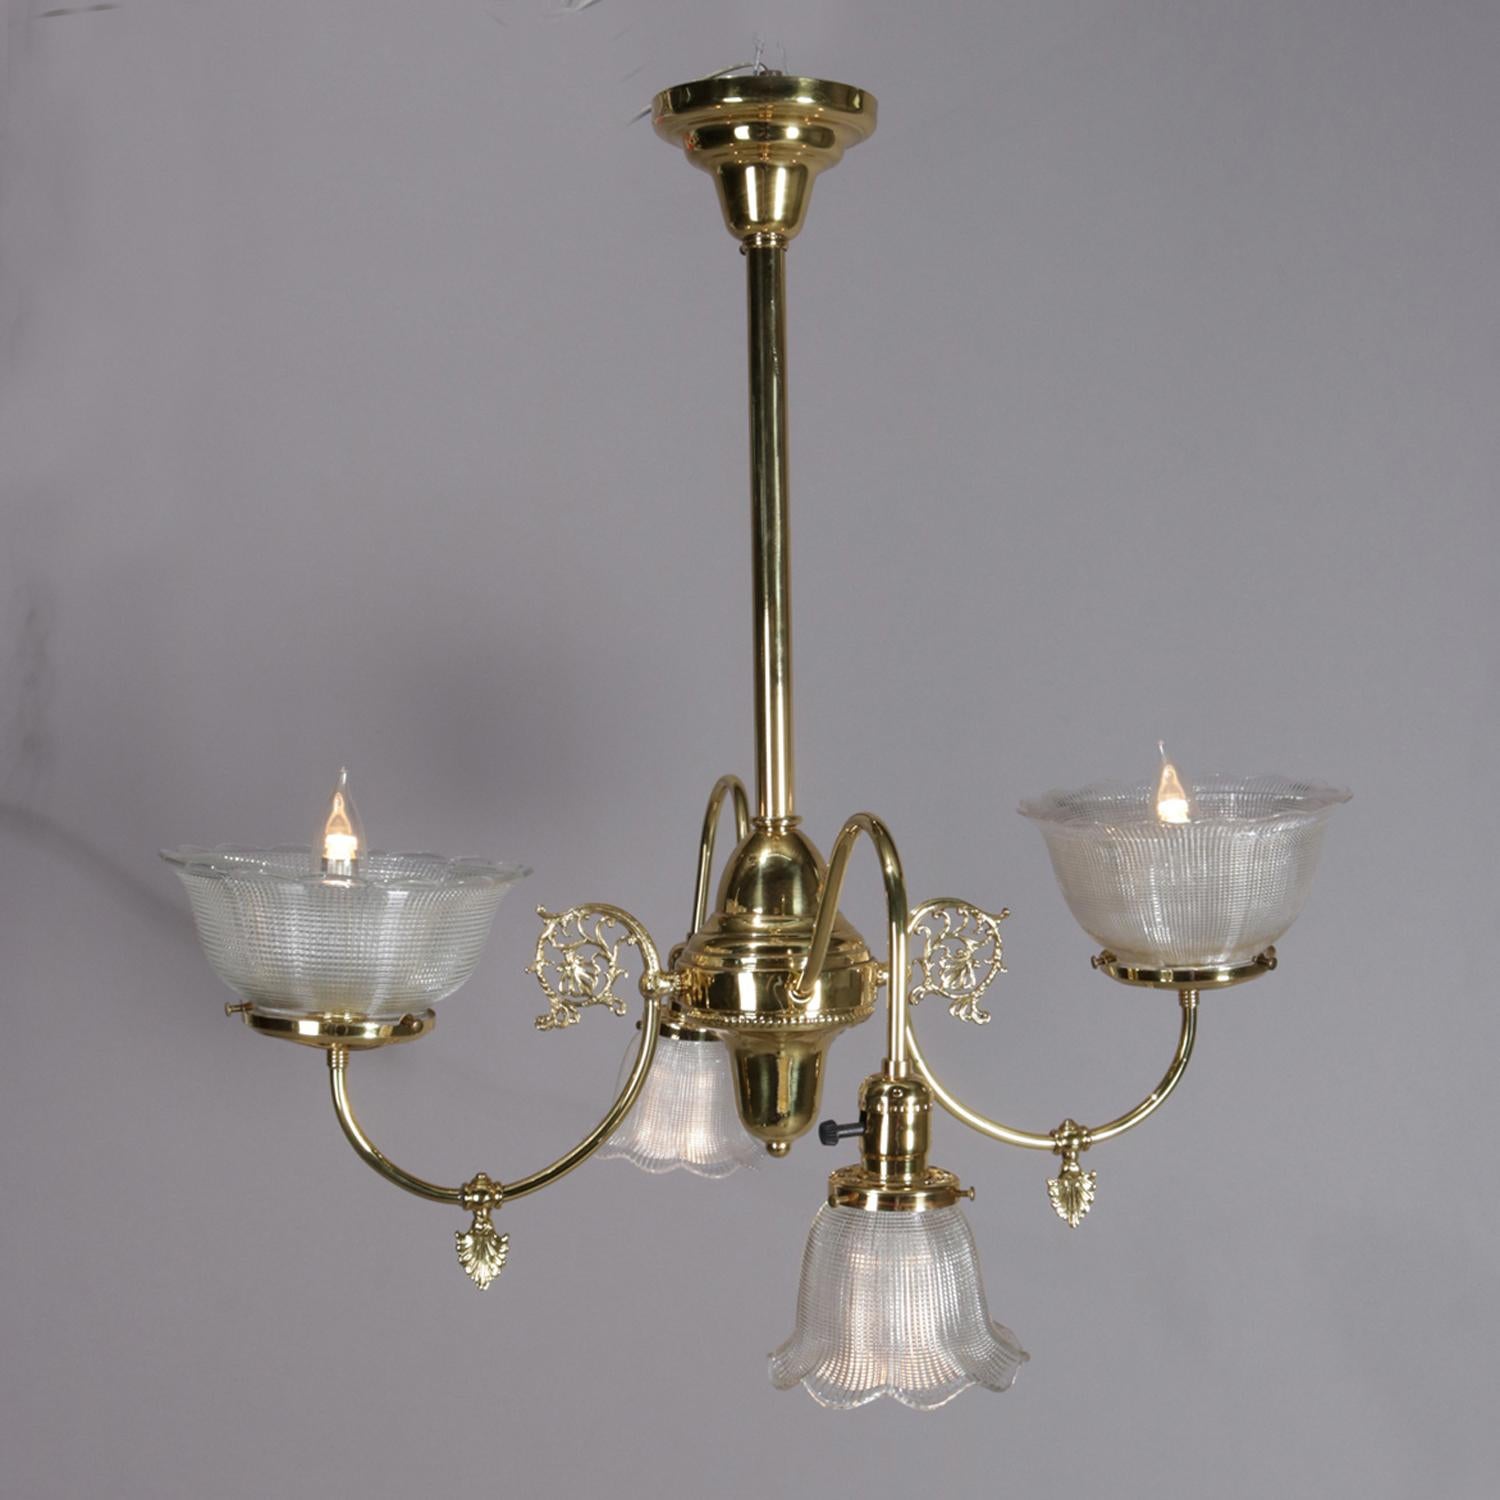 Antique Victorian gas conversion style Up and Down hanging light fixture features brass frame with four C-scroll and foliate arm terminating in pressed glass shades, independently controlled lights, circa 1900

Measures: 27